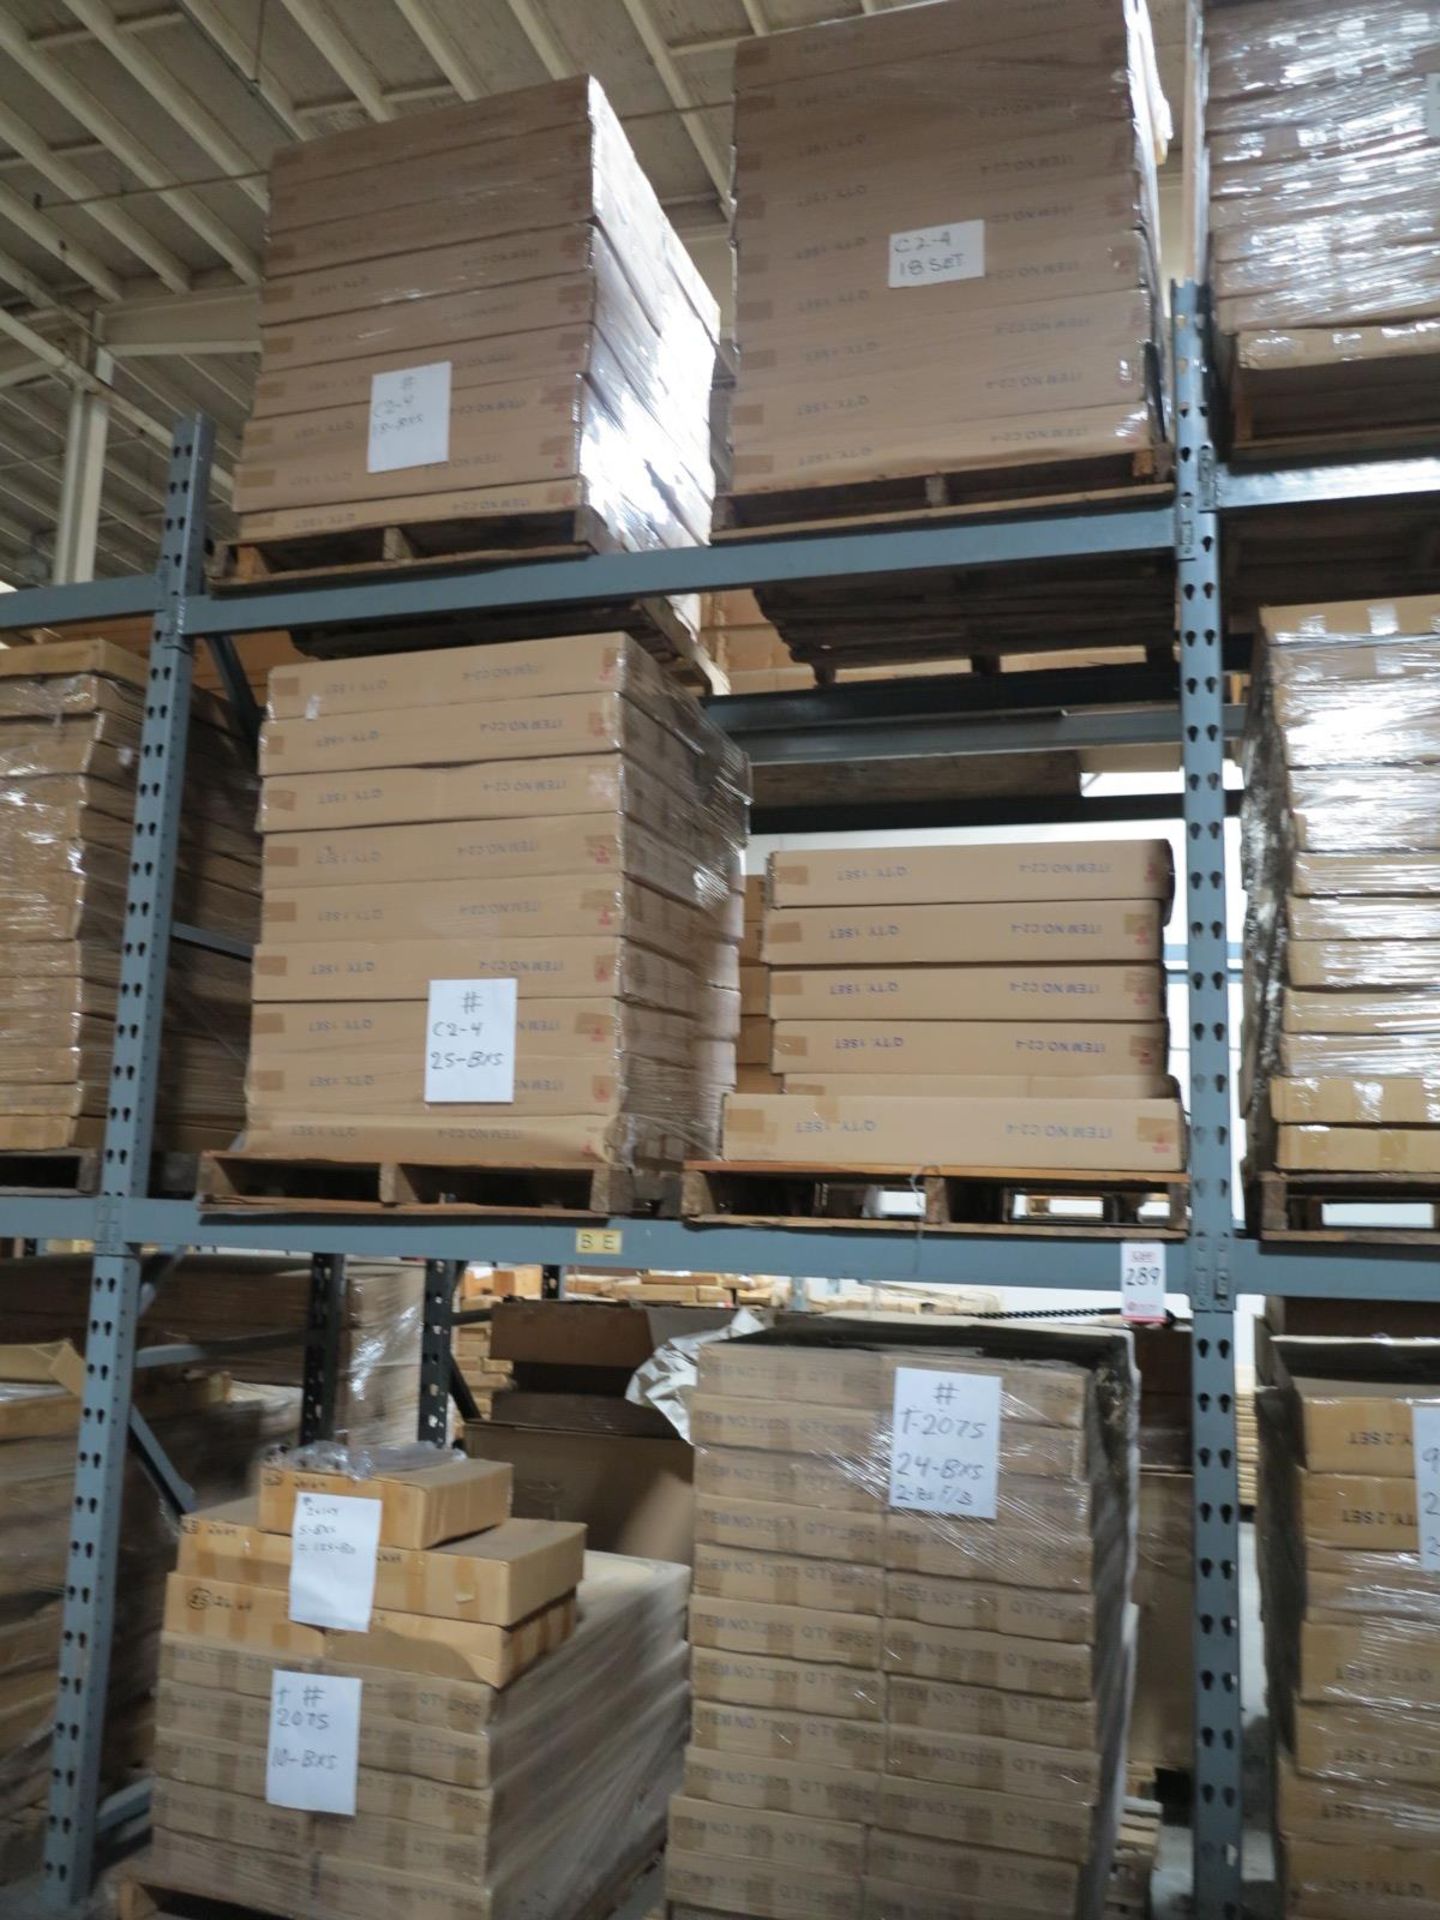 LOT - CONTENTS OF (3) SECTIONS OF PALLET RACK TO INCLUDE: ITEM # 10126, 2 WAY W (2) 16" STR. ARMS,